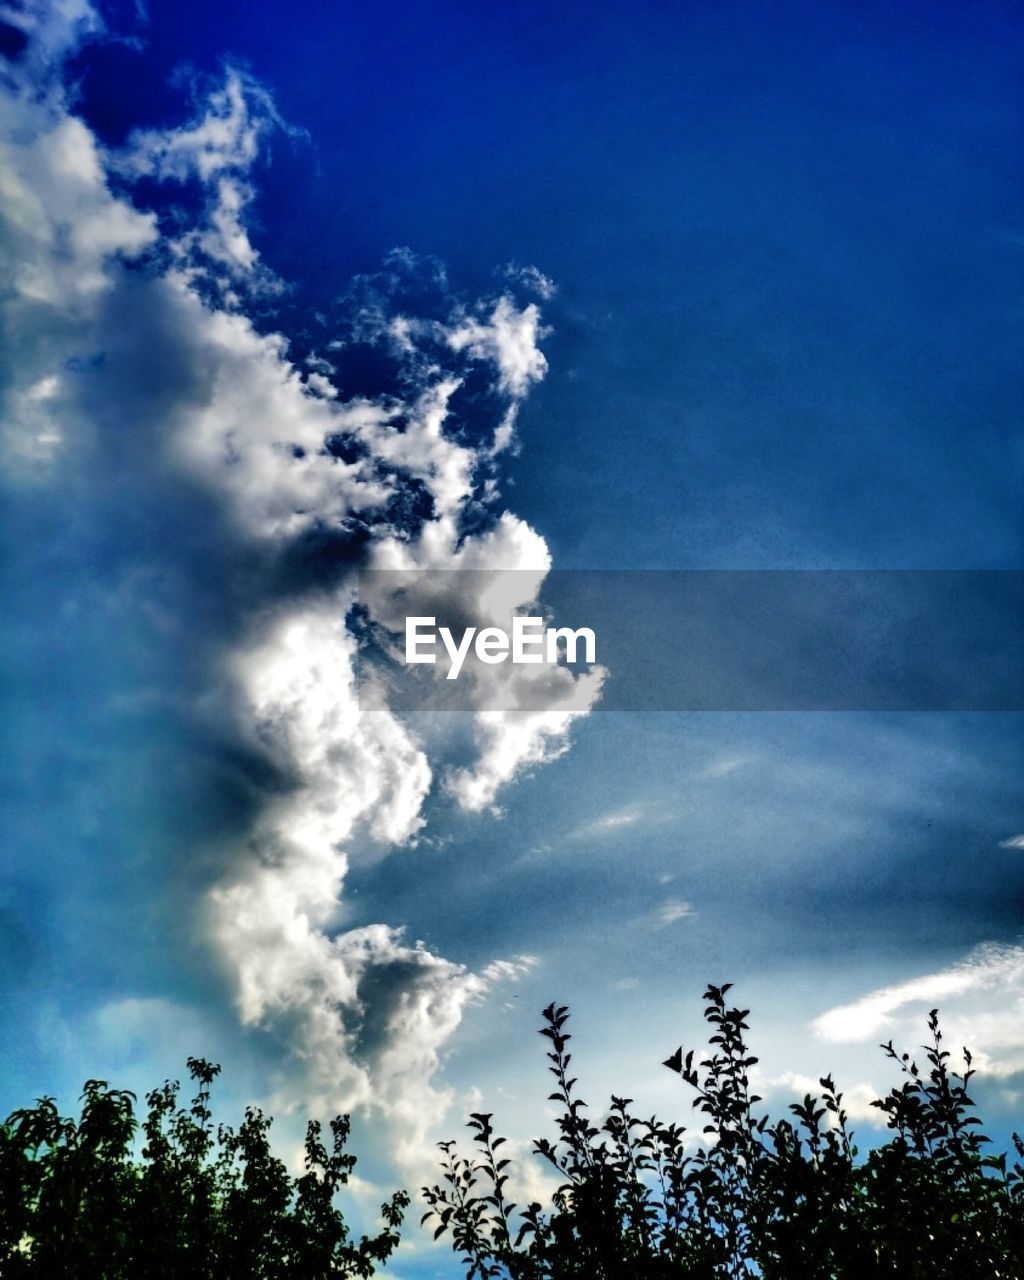 sky, cloud, tree, plant, low angle view, sunlight, nature, beauty in nature, blue, no people, tranquility, scenics - nature, outdoors, silhouette, day, environment, tranquil scene, growth